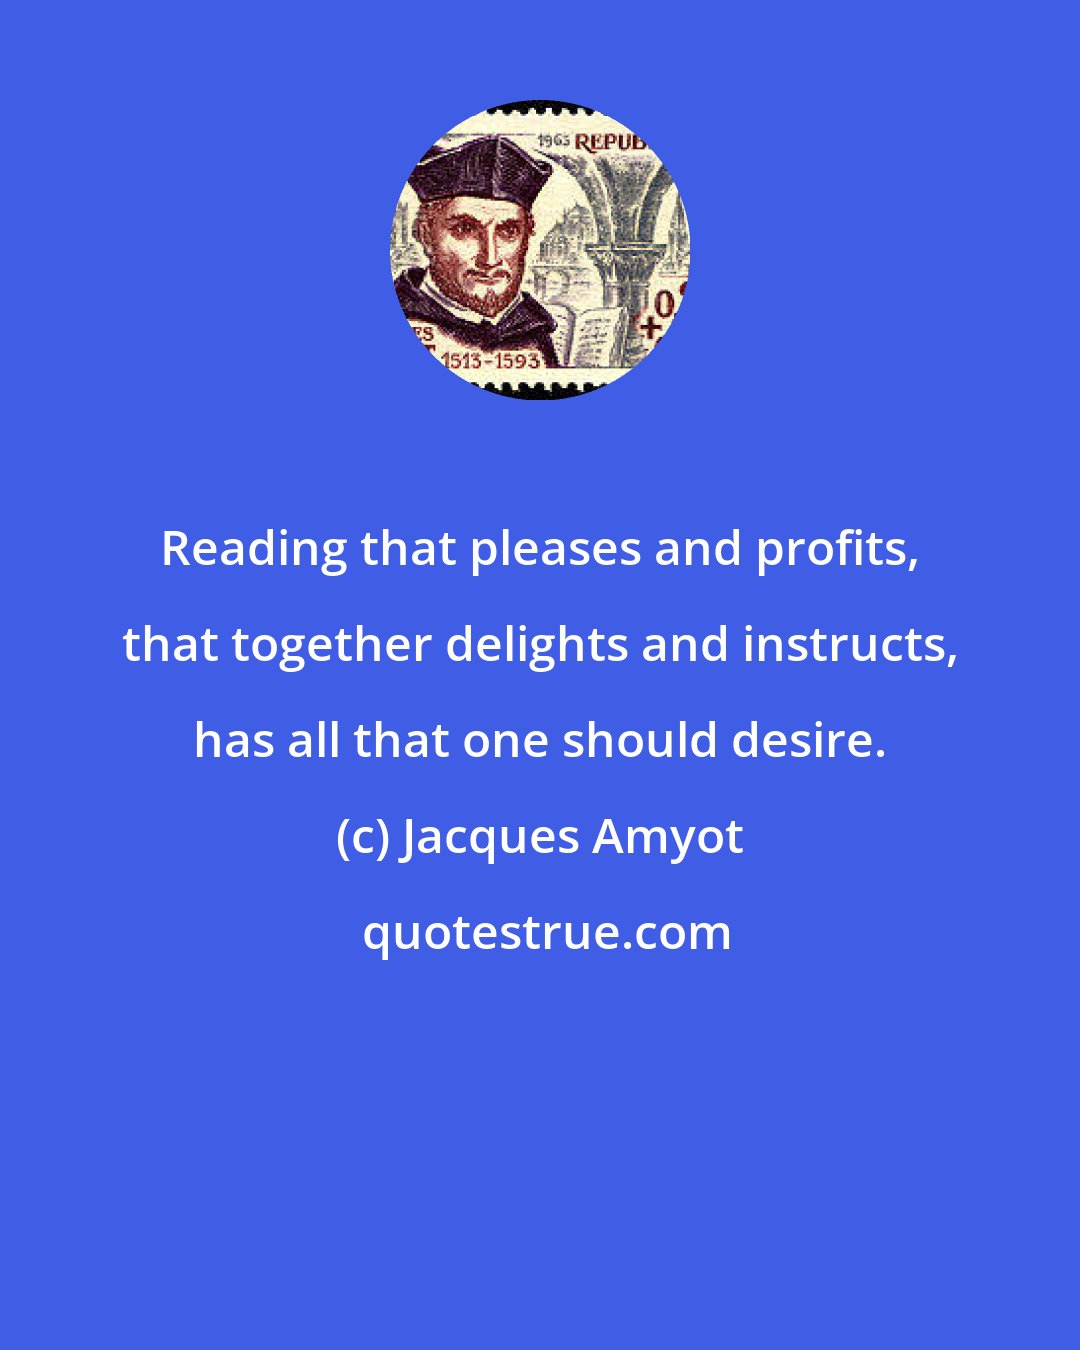 Jacques Amyot: Reading that pleases and profits, that together delights and instructs, has all that one should desire.